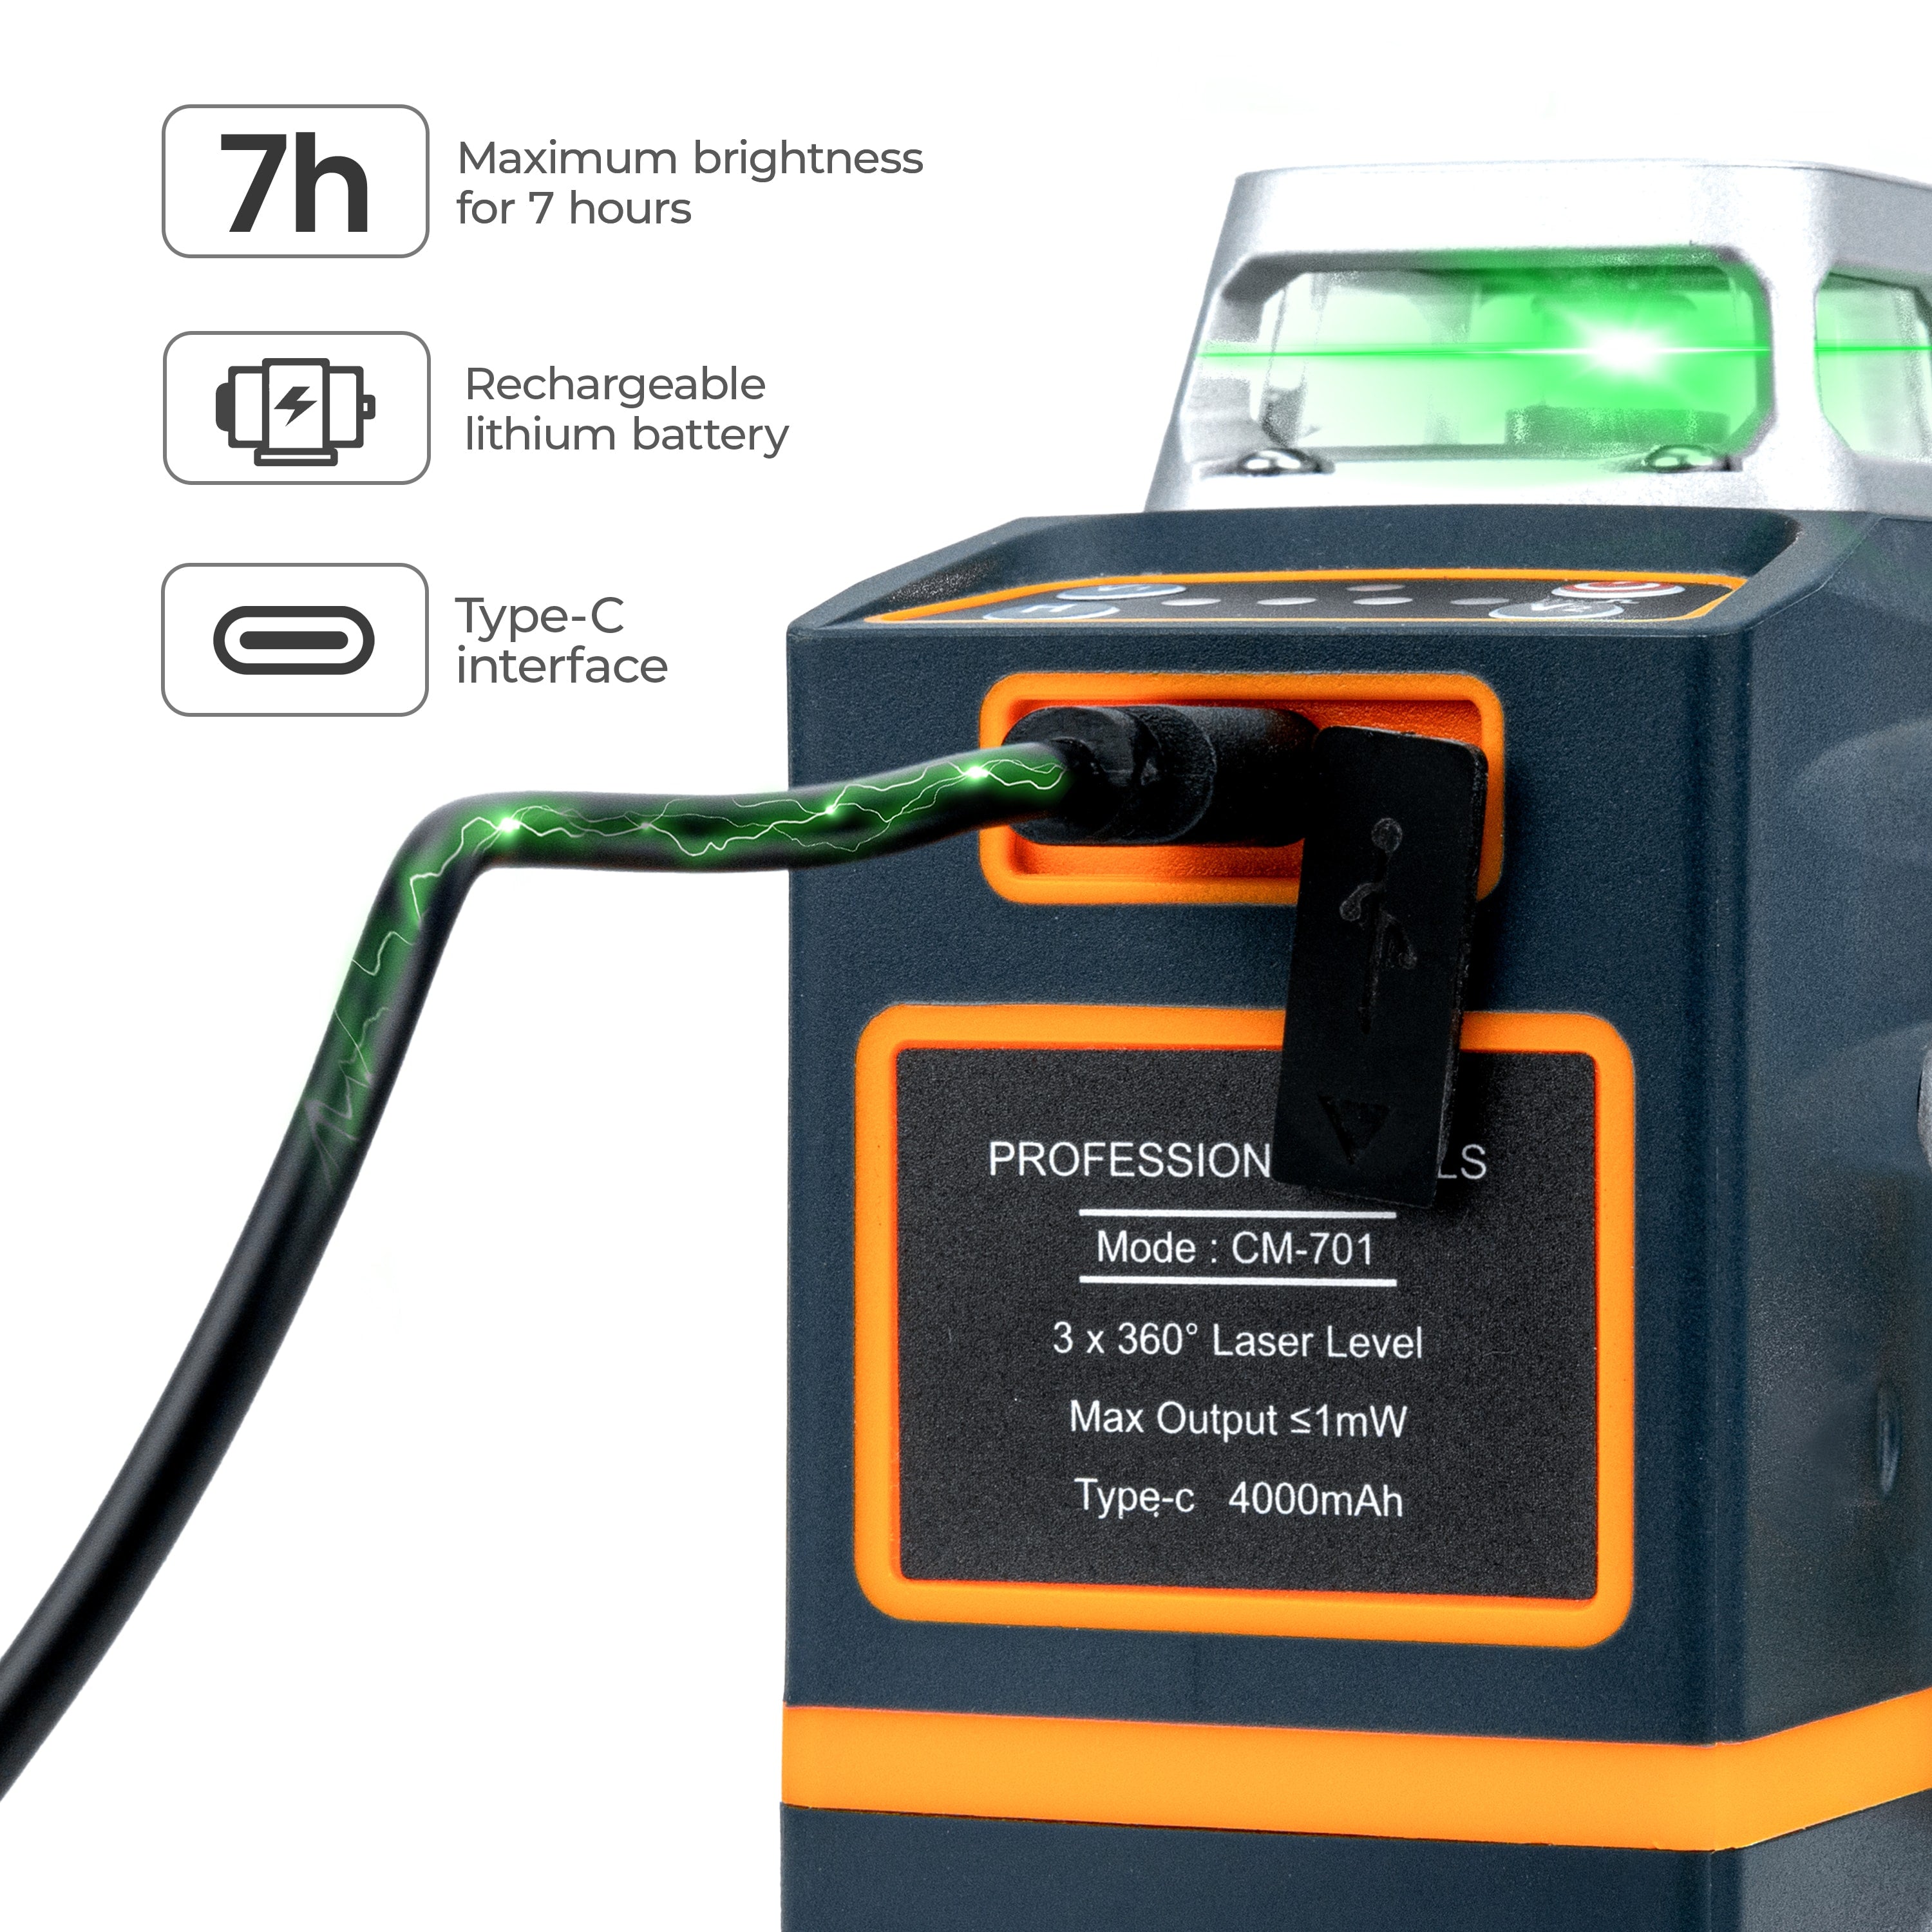 CIGMAN CM-701 3x360° Self Leveling Laser Level, 100ft Green Laser Level with Remote Control